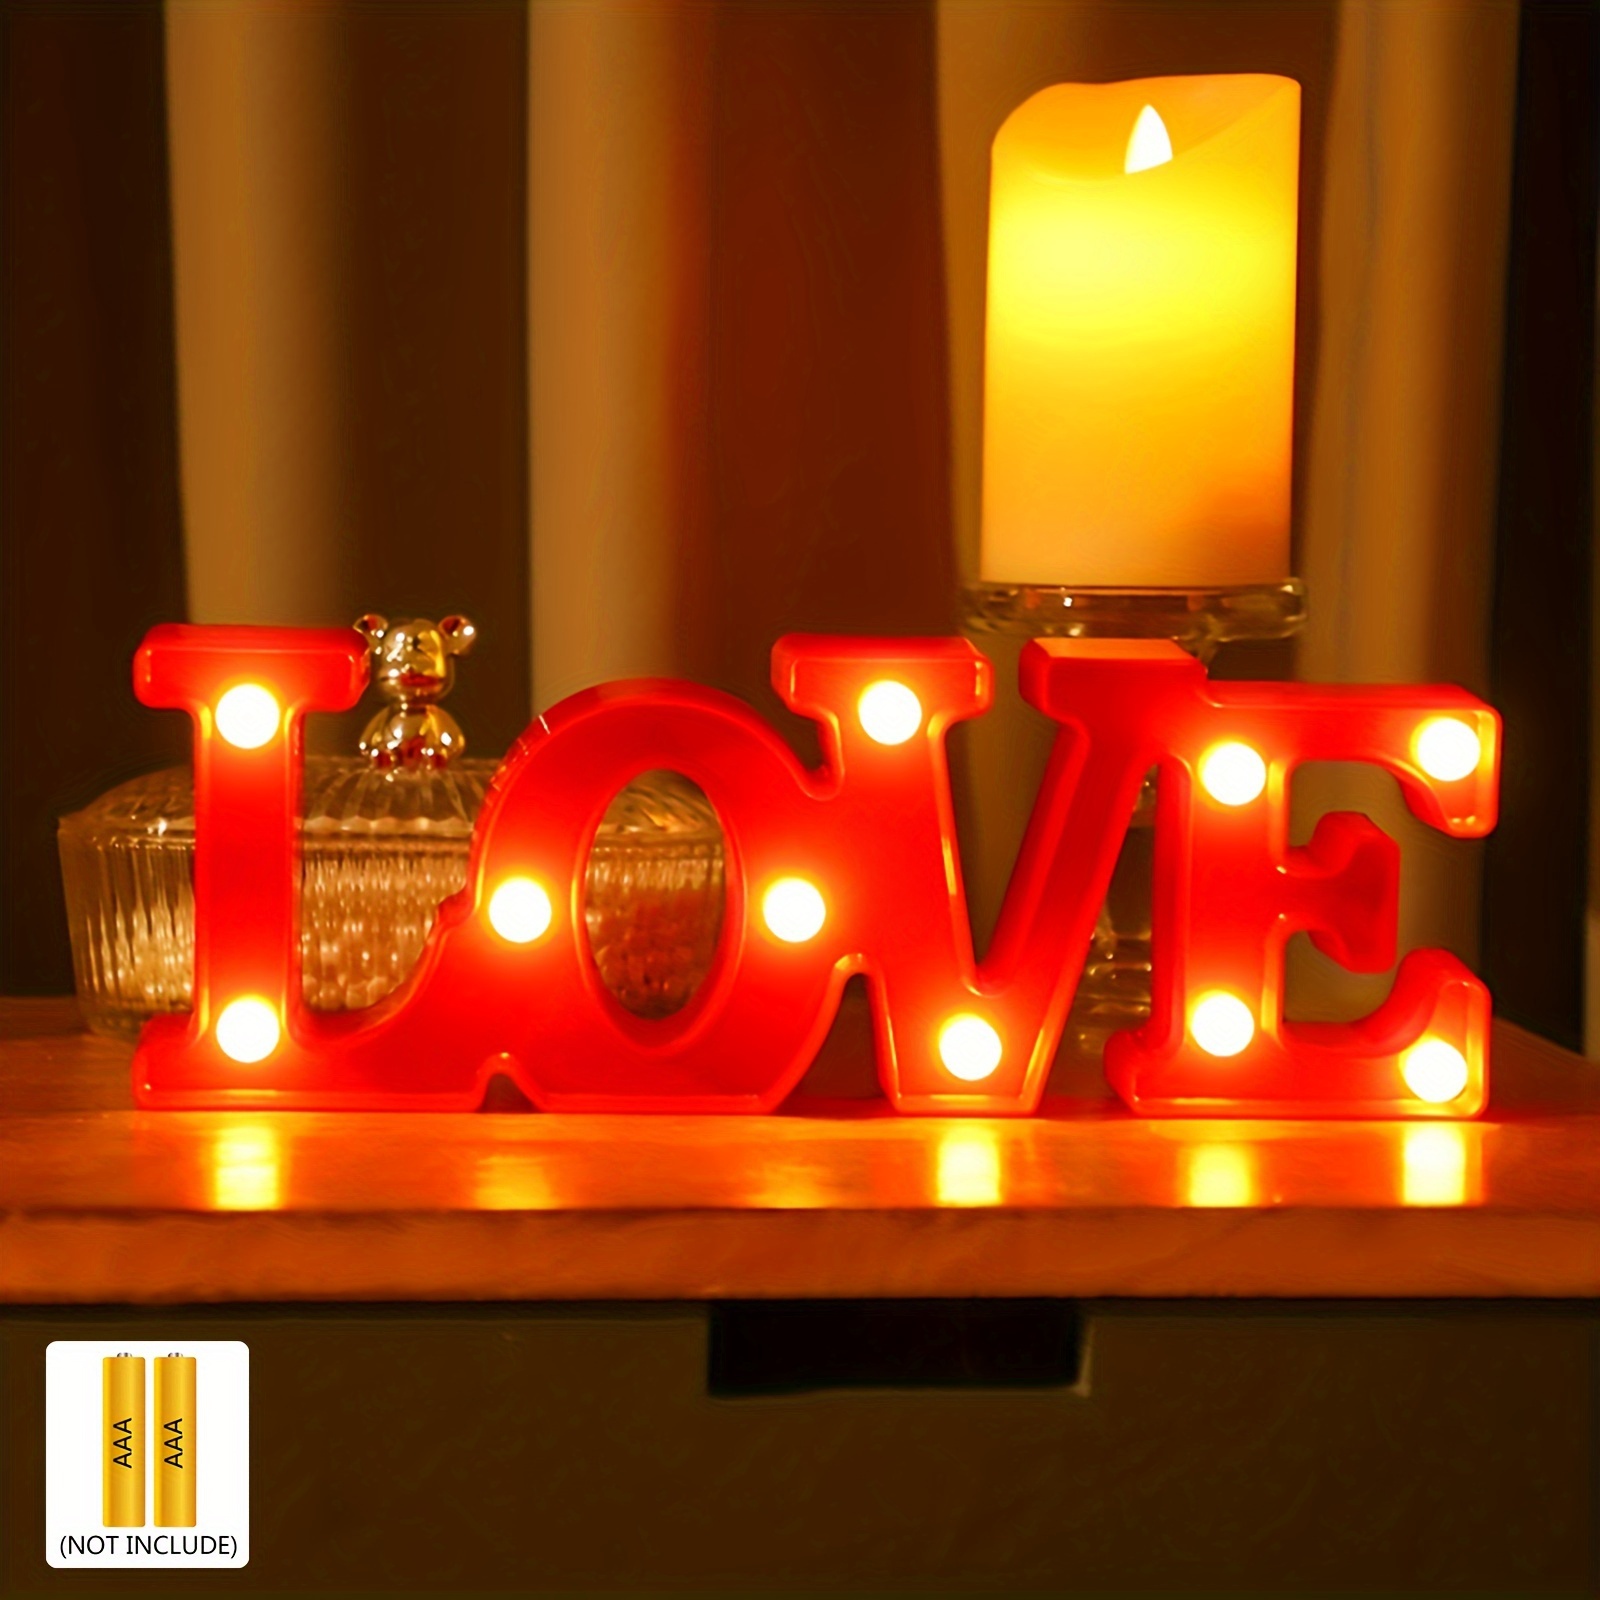 

Romantic Love Shape Night Light - Perfect For Weddings, Proposals, And Wall Decorations!